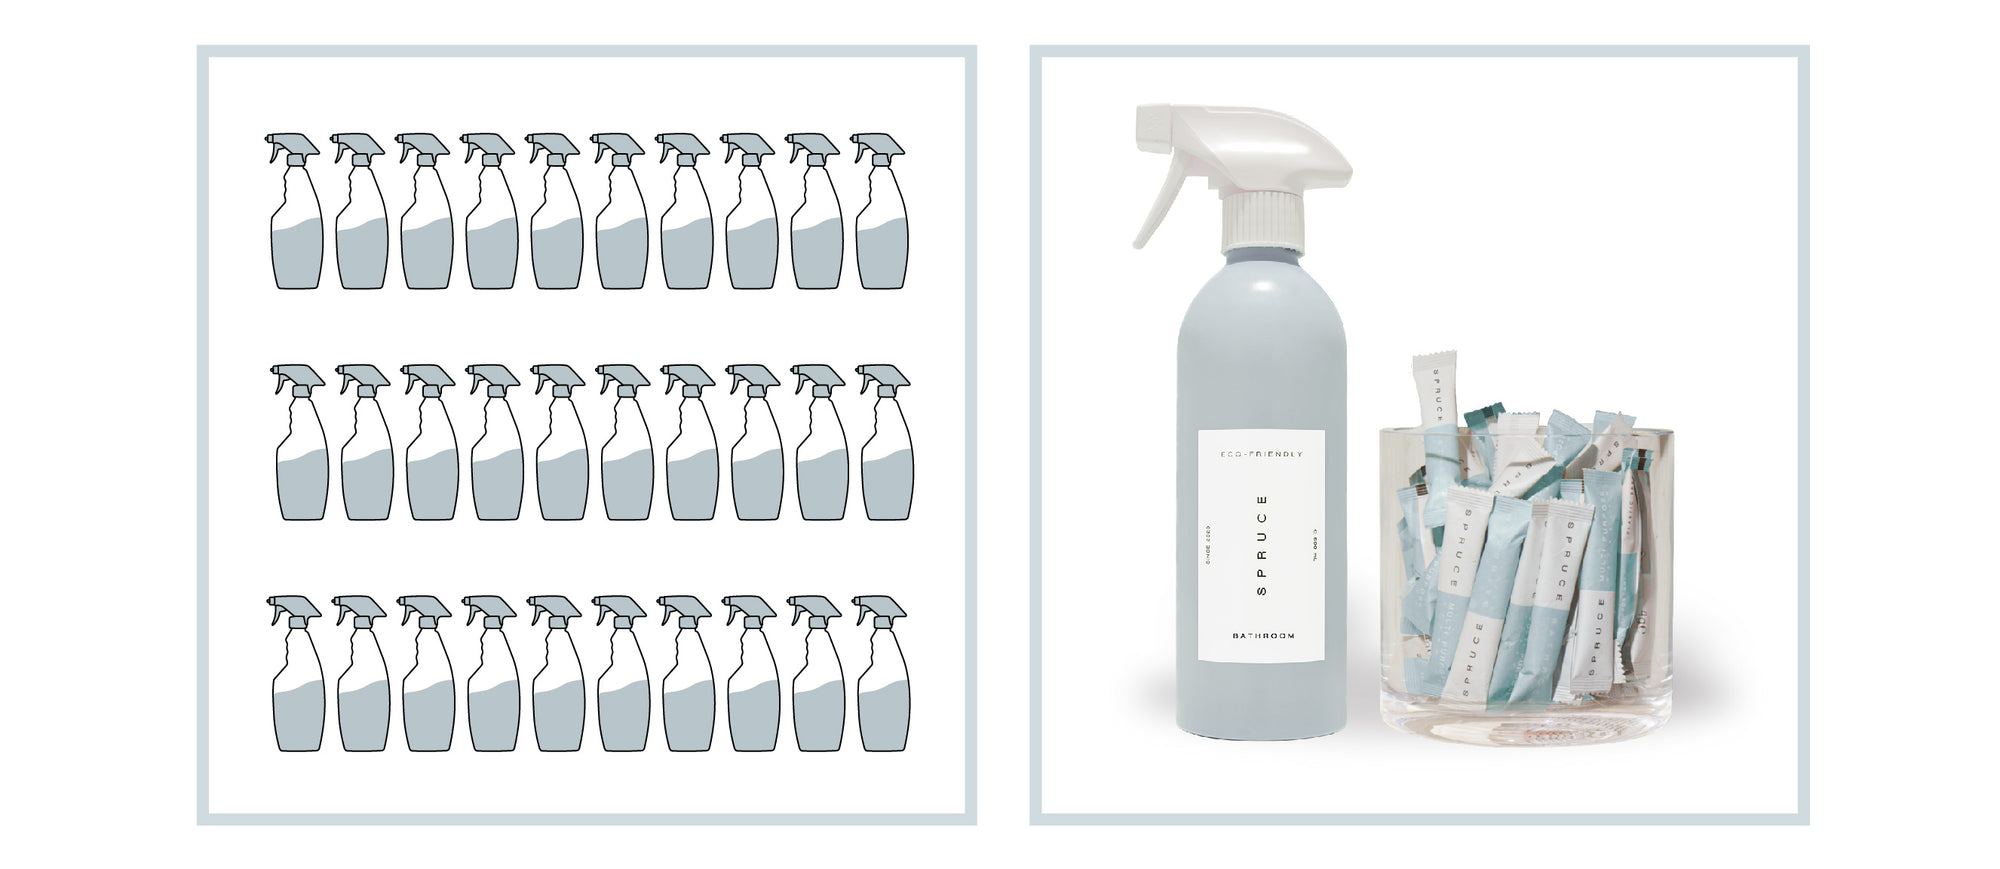 30 plastic shower cleaner sprays in comparison to compact concentrated cleaning refills